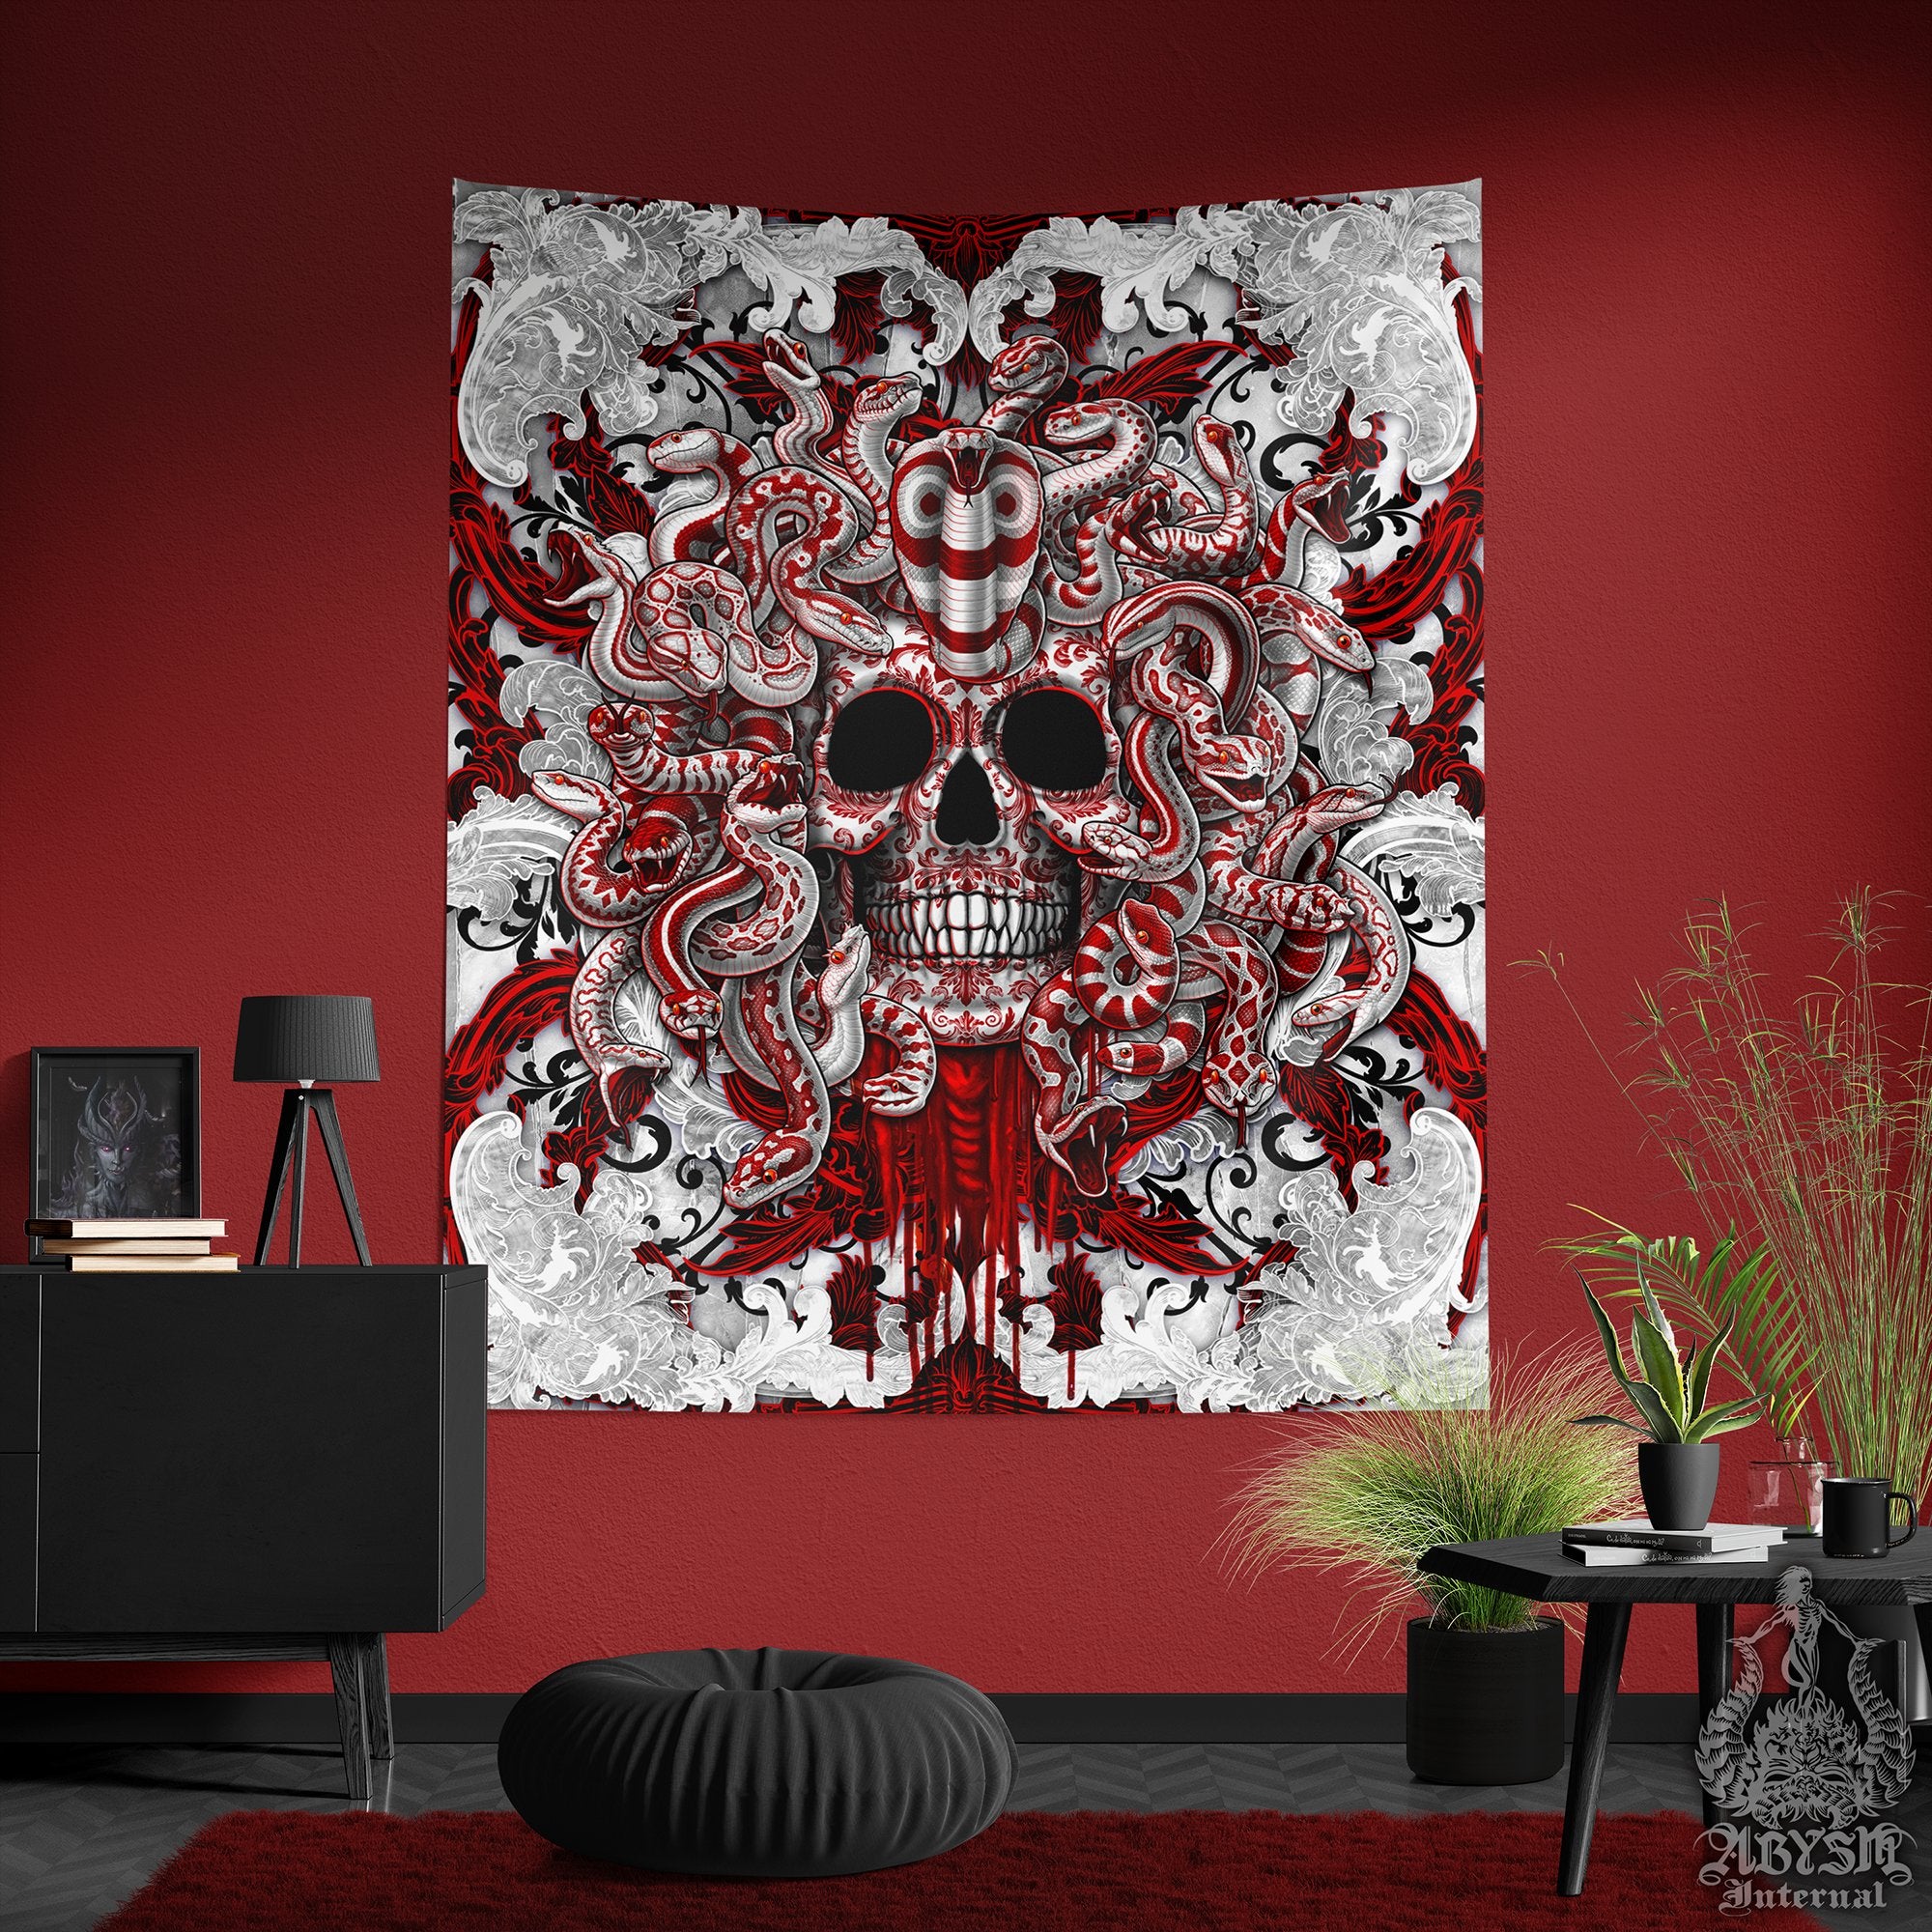 Gothic Tapestry, White Goth Wall Hanging, Horror Home Decor, Vertical Art Print - Medusa, Skull & Snakes, 4 Faces, Bloody - Abysm Internal